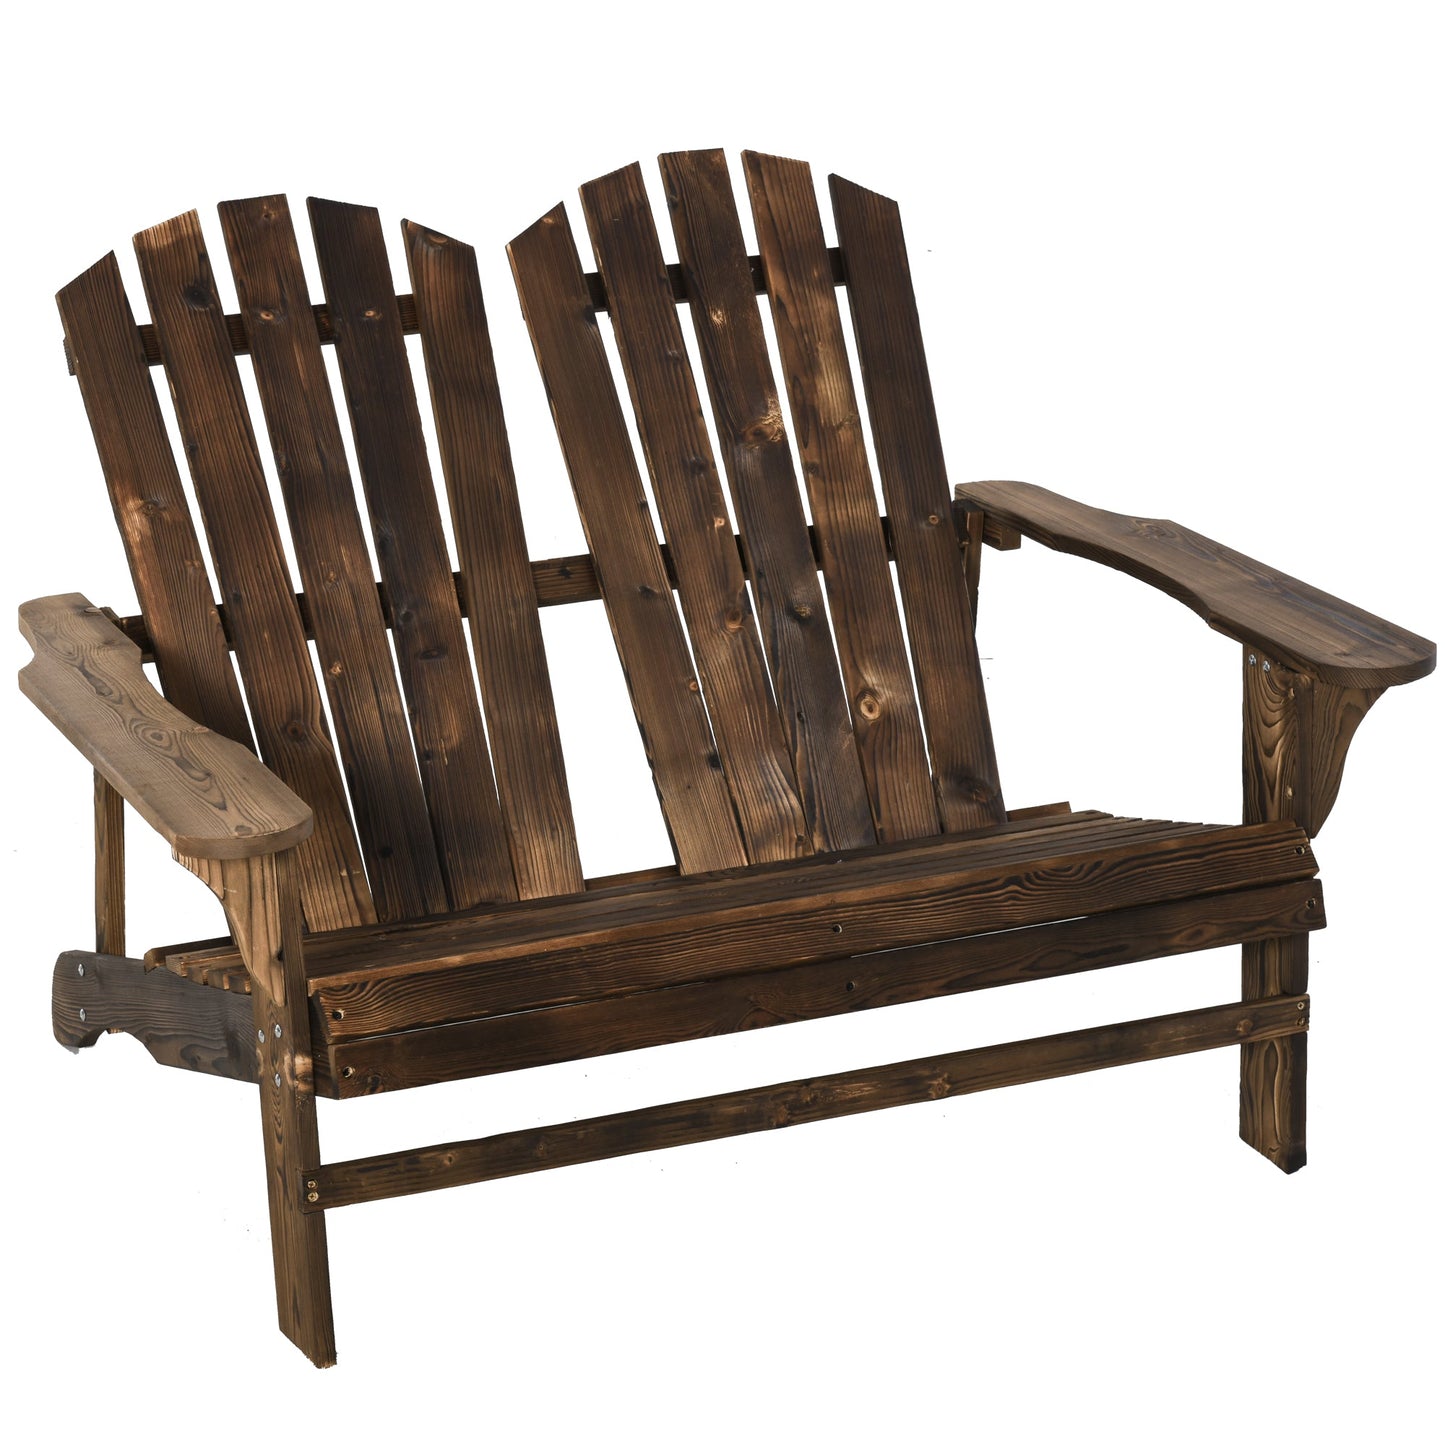 Outdoor and Garden-Outdoor Adirondack Chair, Wooden Loveseat Bench, Lounger Armchair with Flat Back for Garden, Deck, Patio, Fire Pit, Brown - Outdoor Style Company